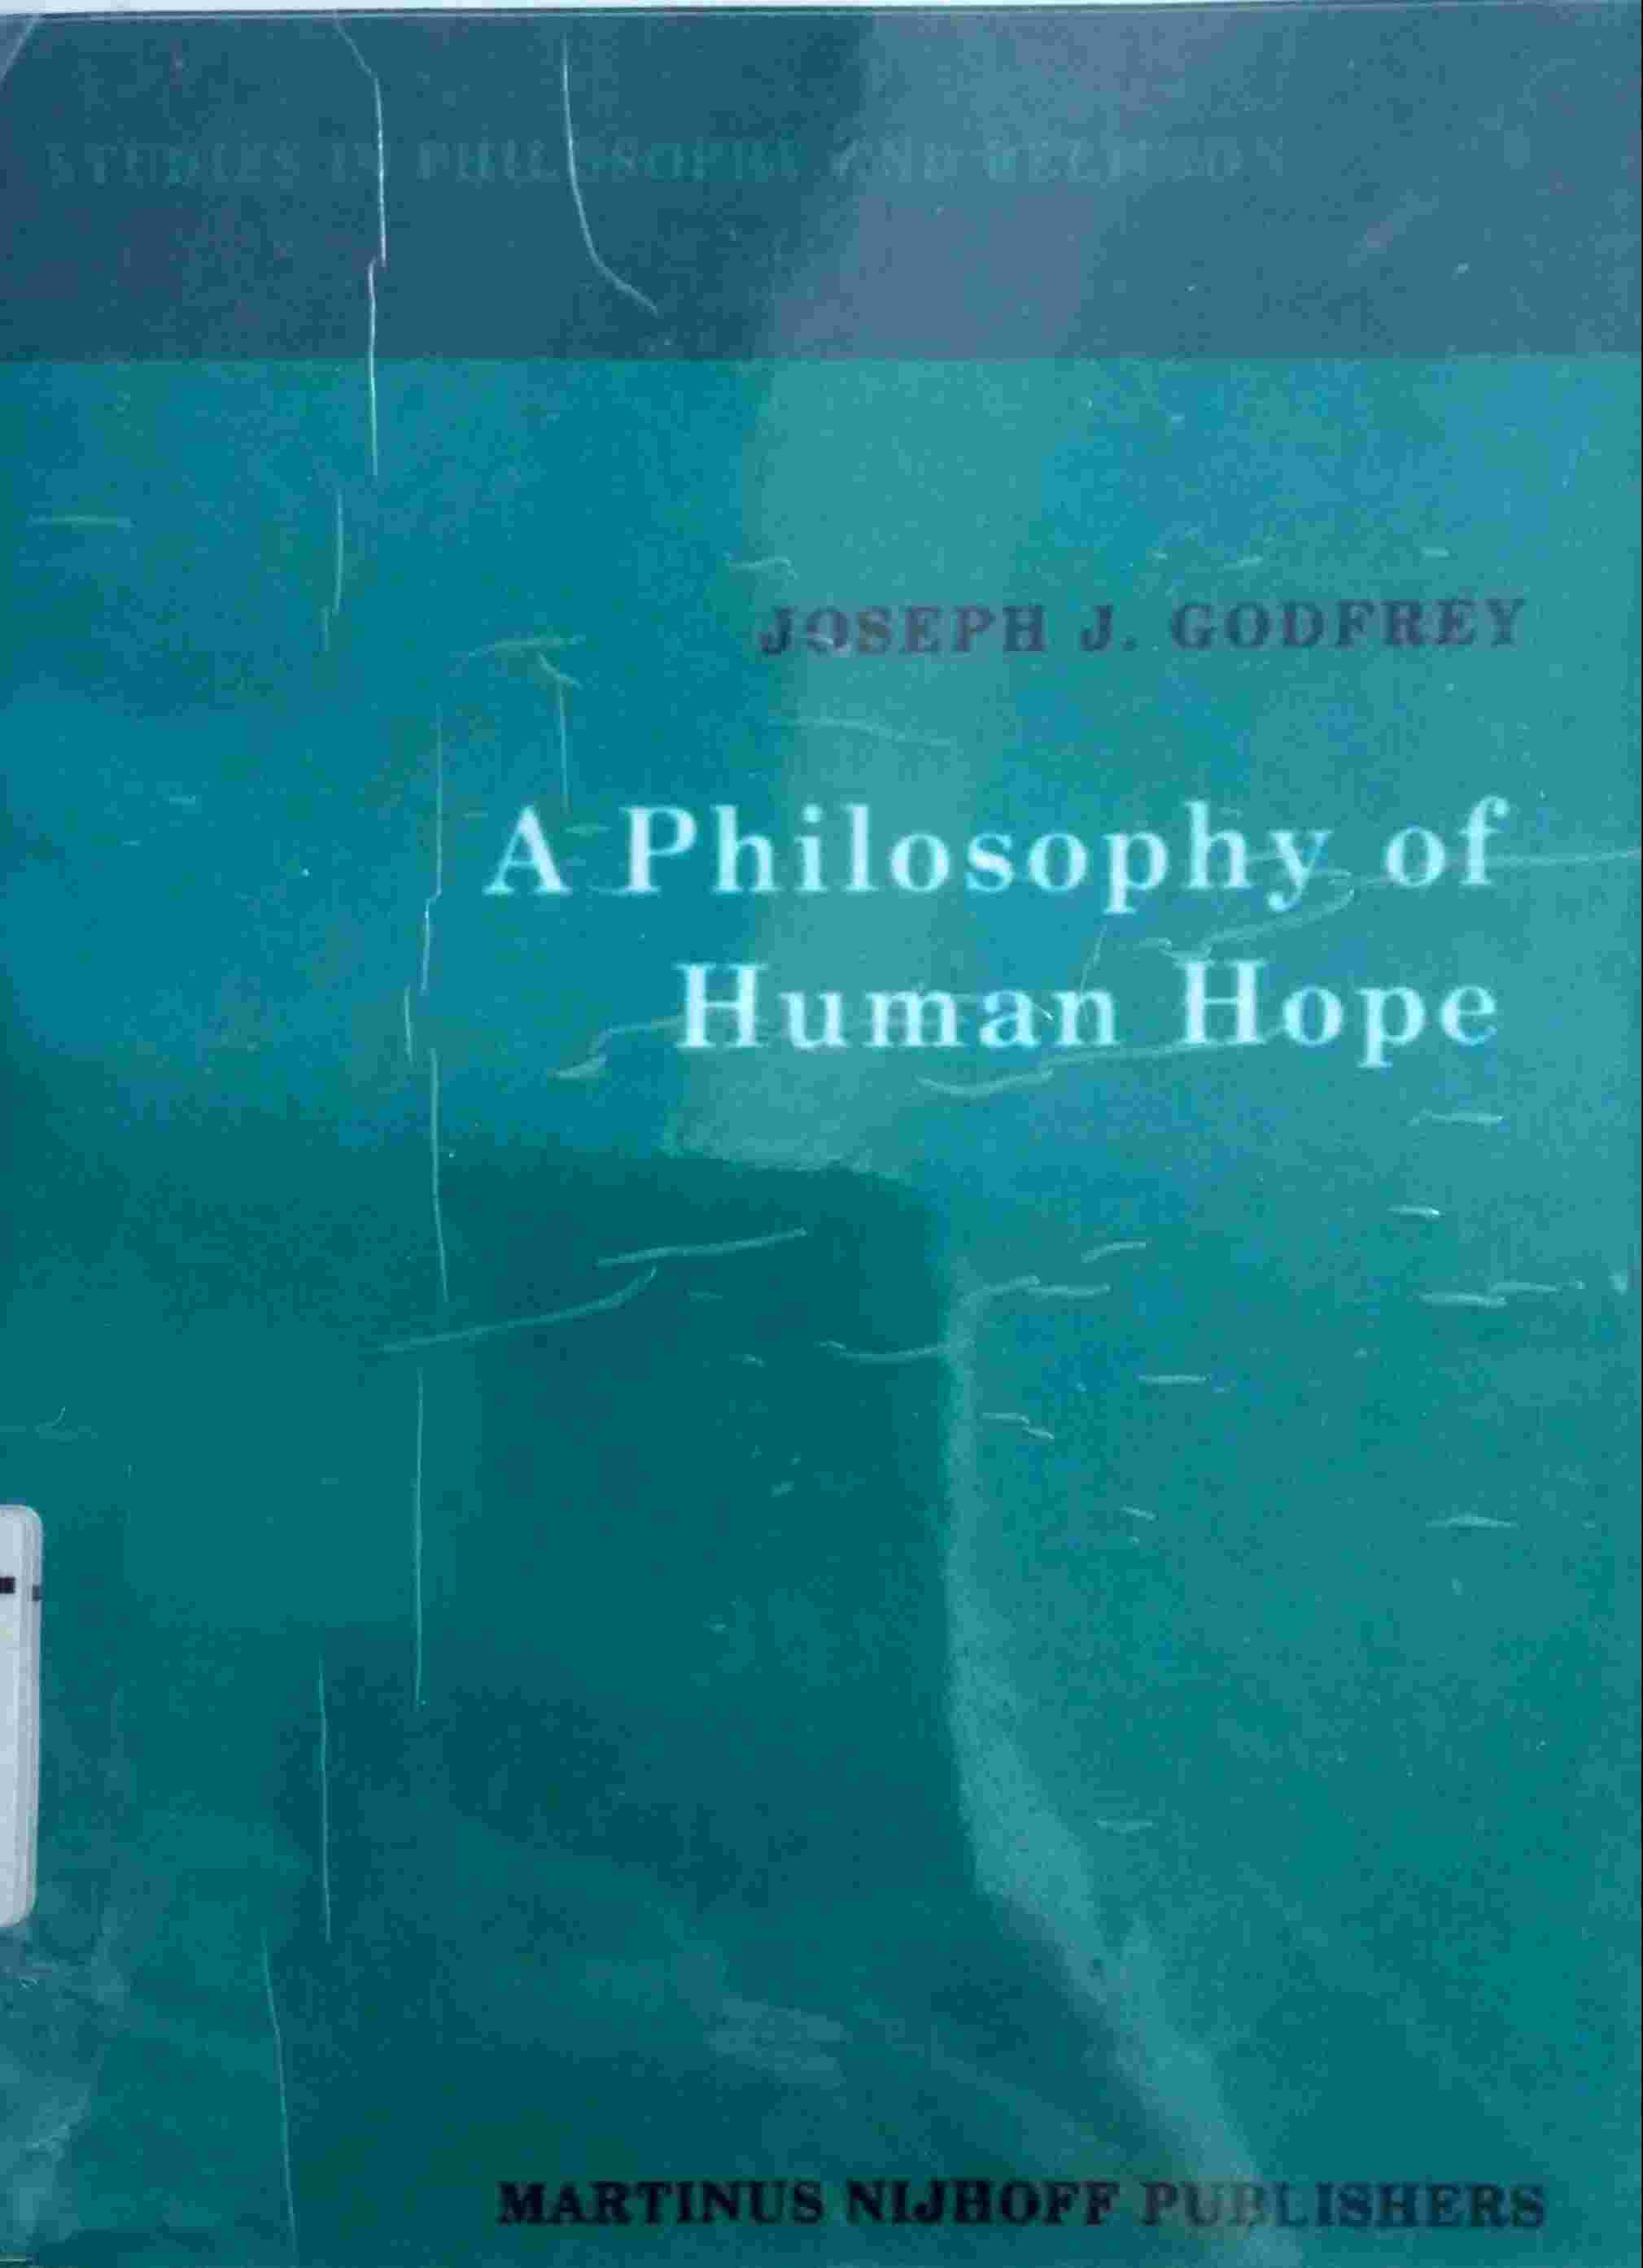 A PHILOSOPHY OF HUMAN HOPE